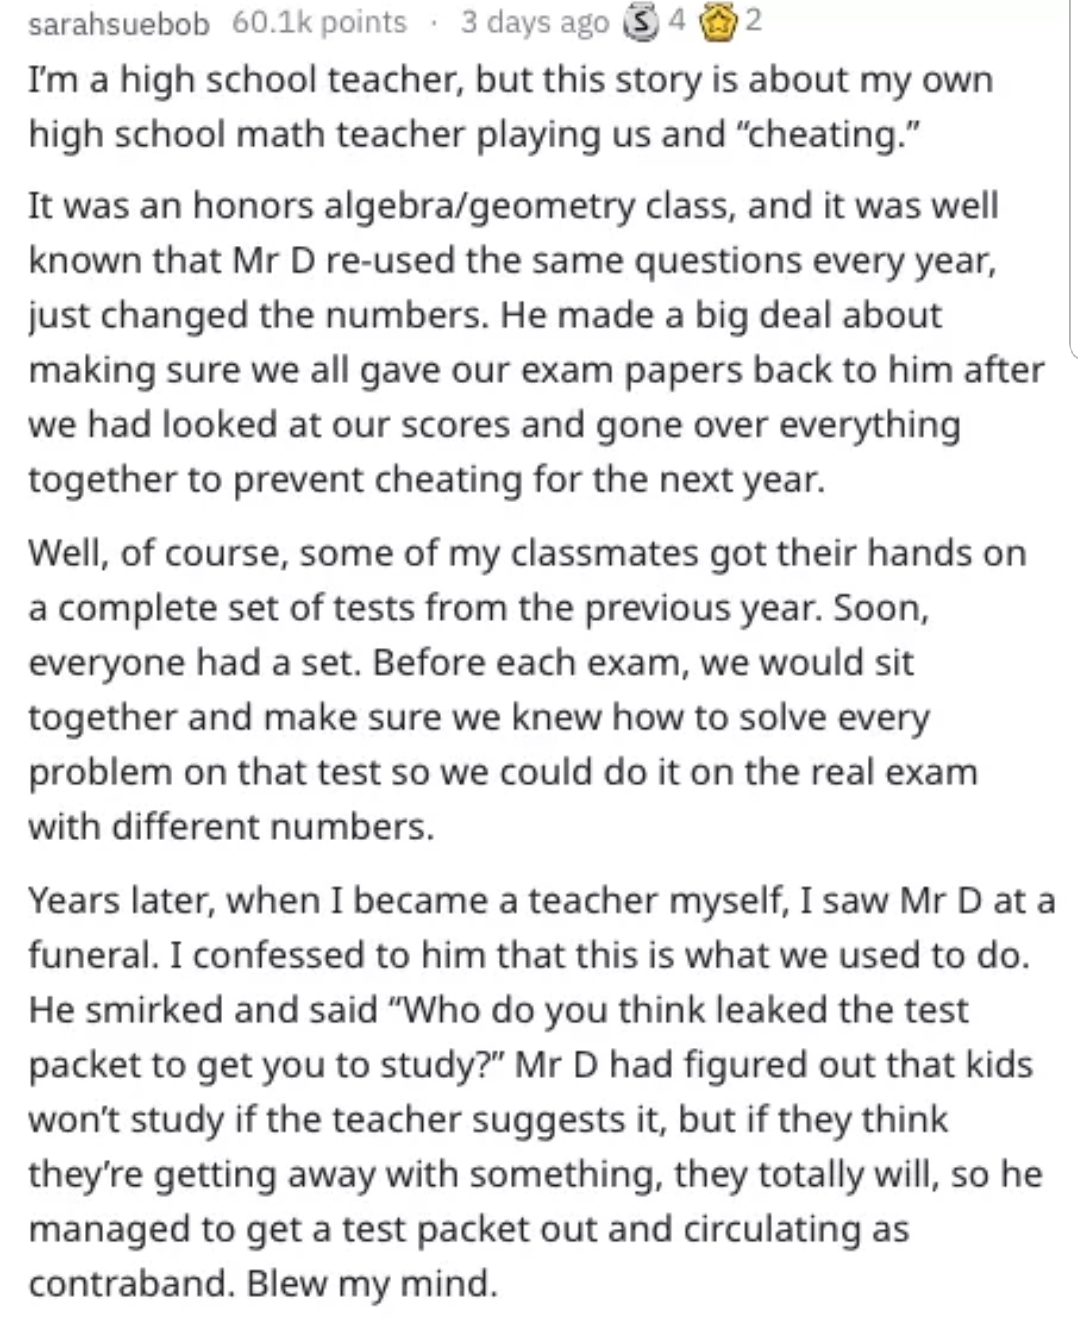 document - sarahsuebob points. 3 days ago $ 4 2 I'm a high school teacher, but this story is about my own high school math teacher playing us and "cheating." It was an honors algebrageometry class, and it was well known that Mr D reused the same questions